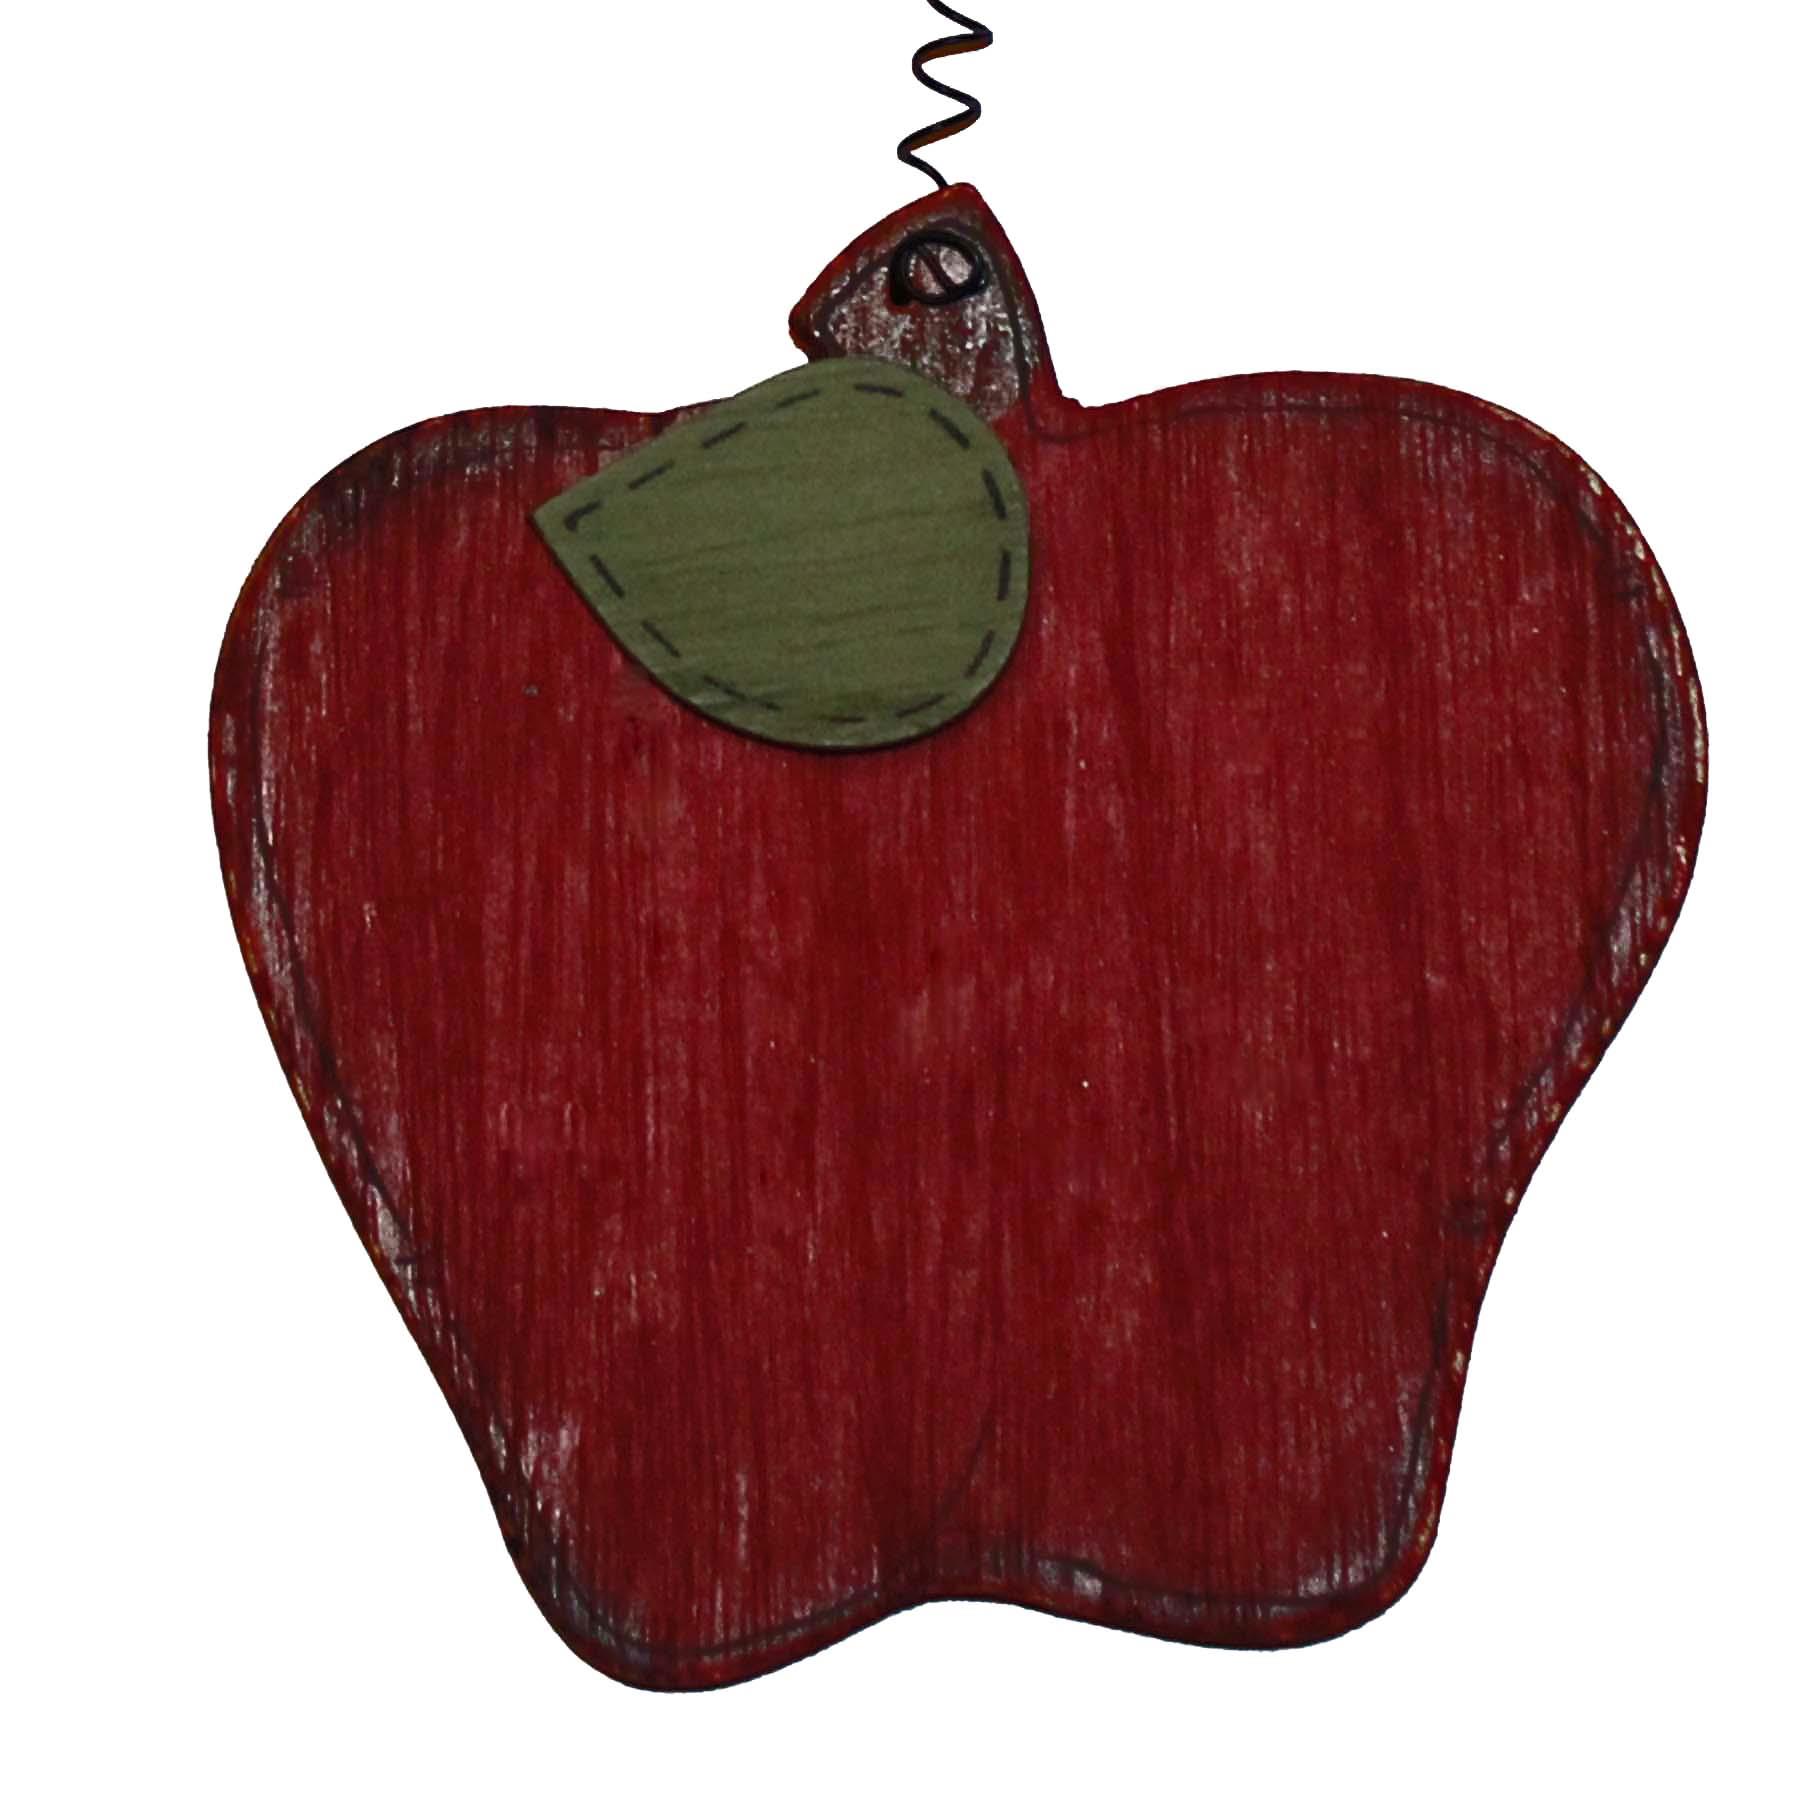 Wooden #1 Teacher Ruler and Apple Hanging Plaque Sign